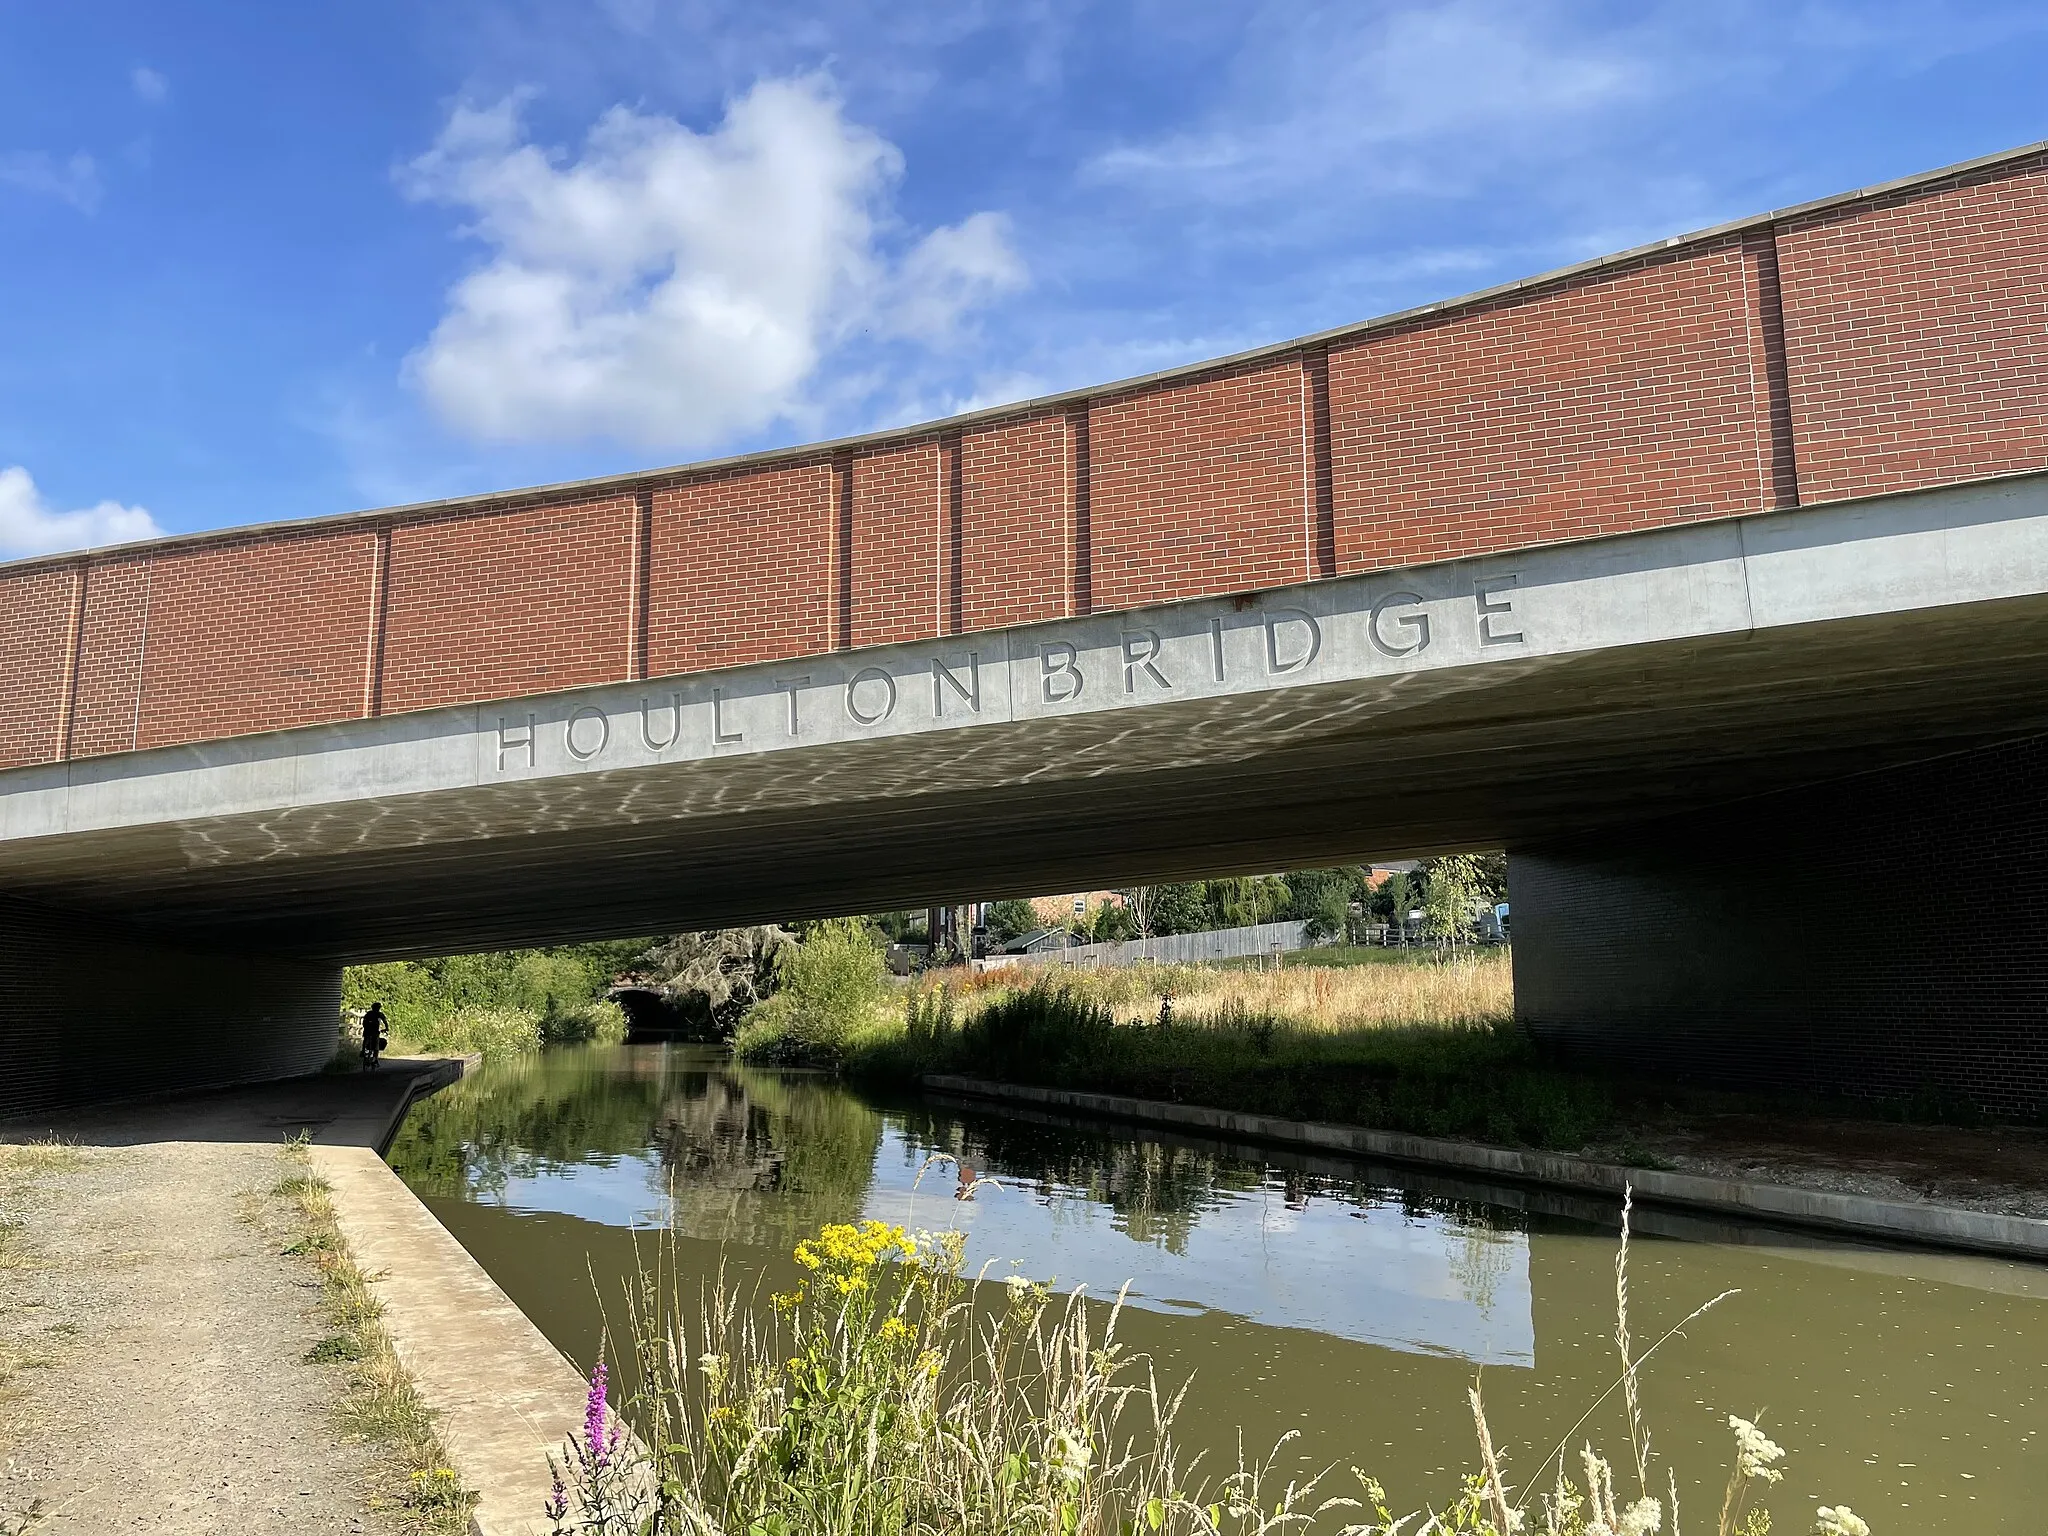 Photo showing: A picture of the new Houlton Bridge as viewed from the Oxford Canal towpath.